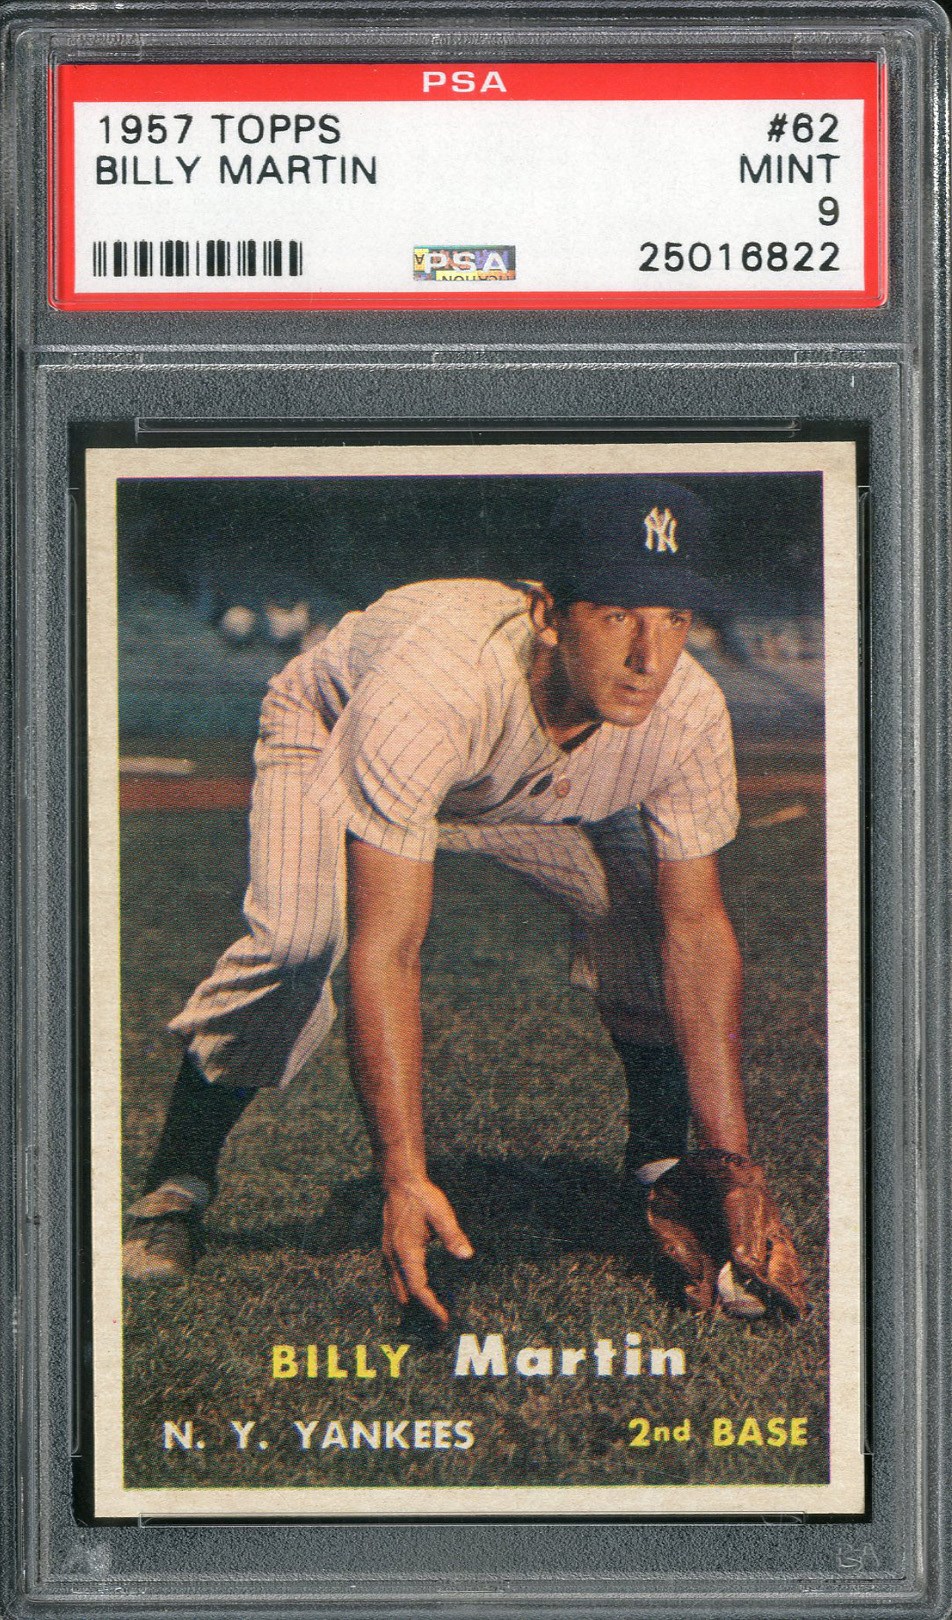 Baseball and Trading Cards - 1957 Topps #62 Billy Martin PSA MINT 9